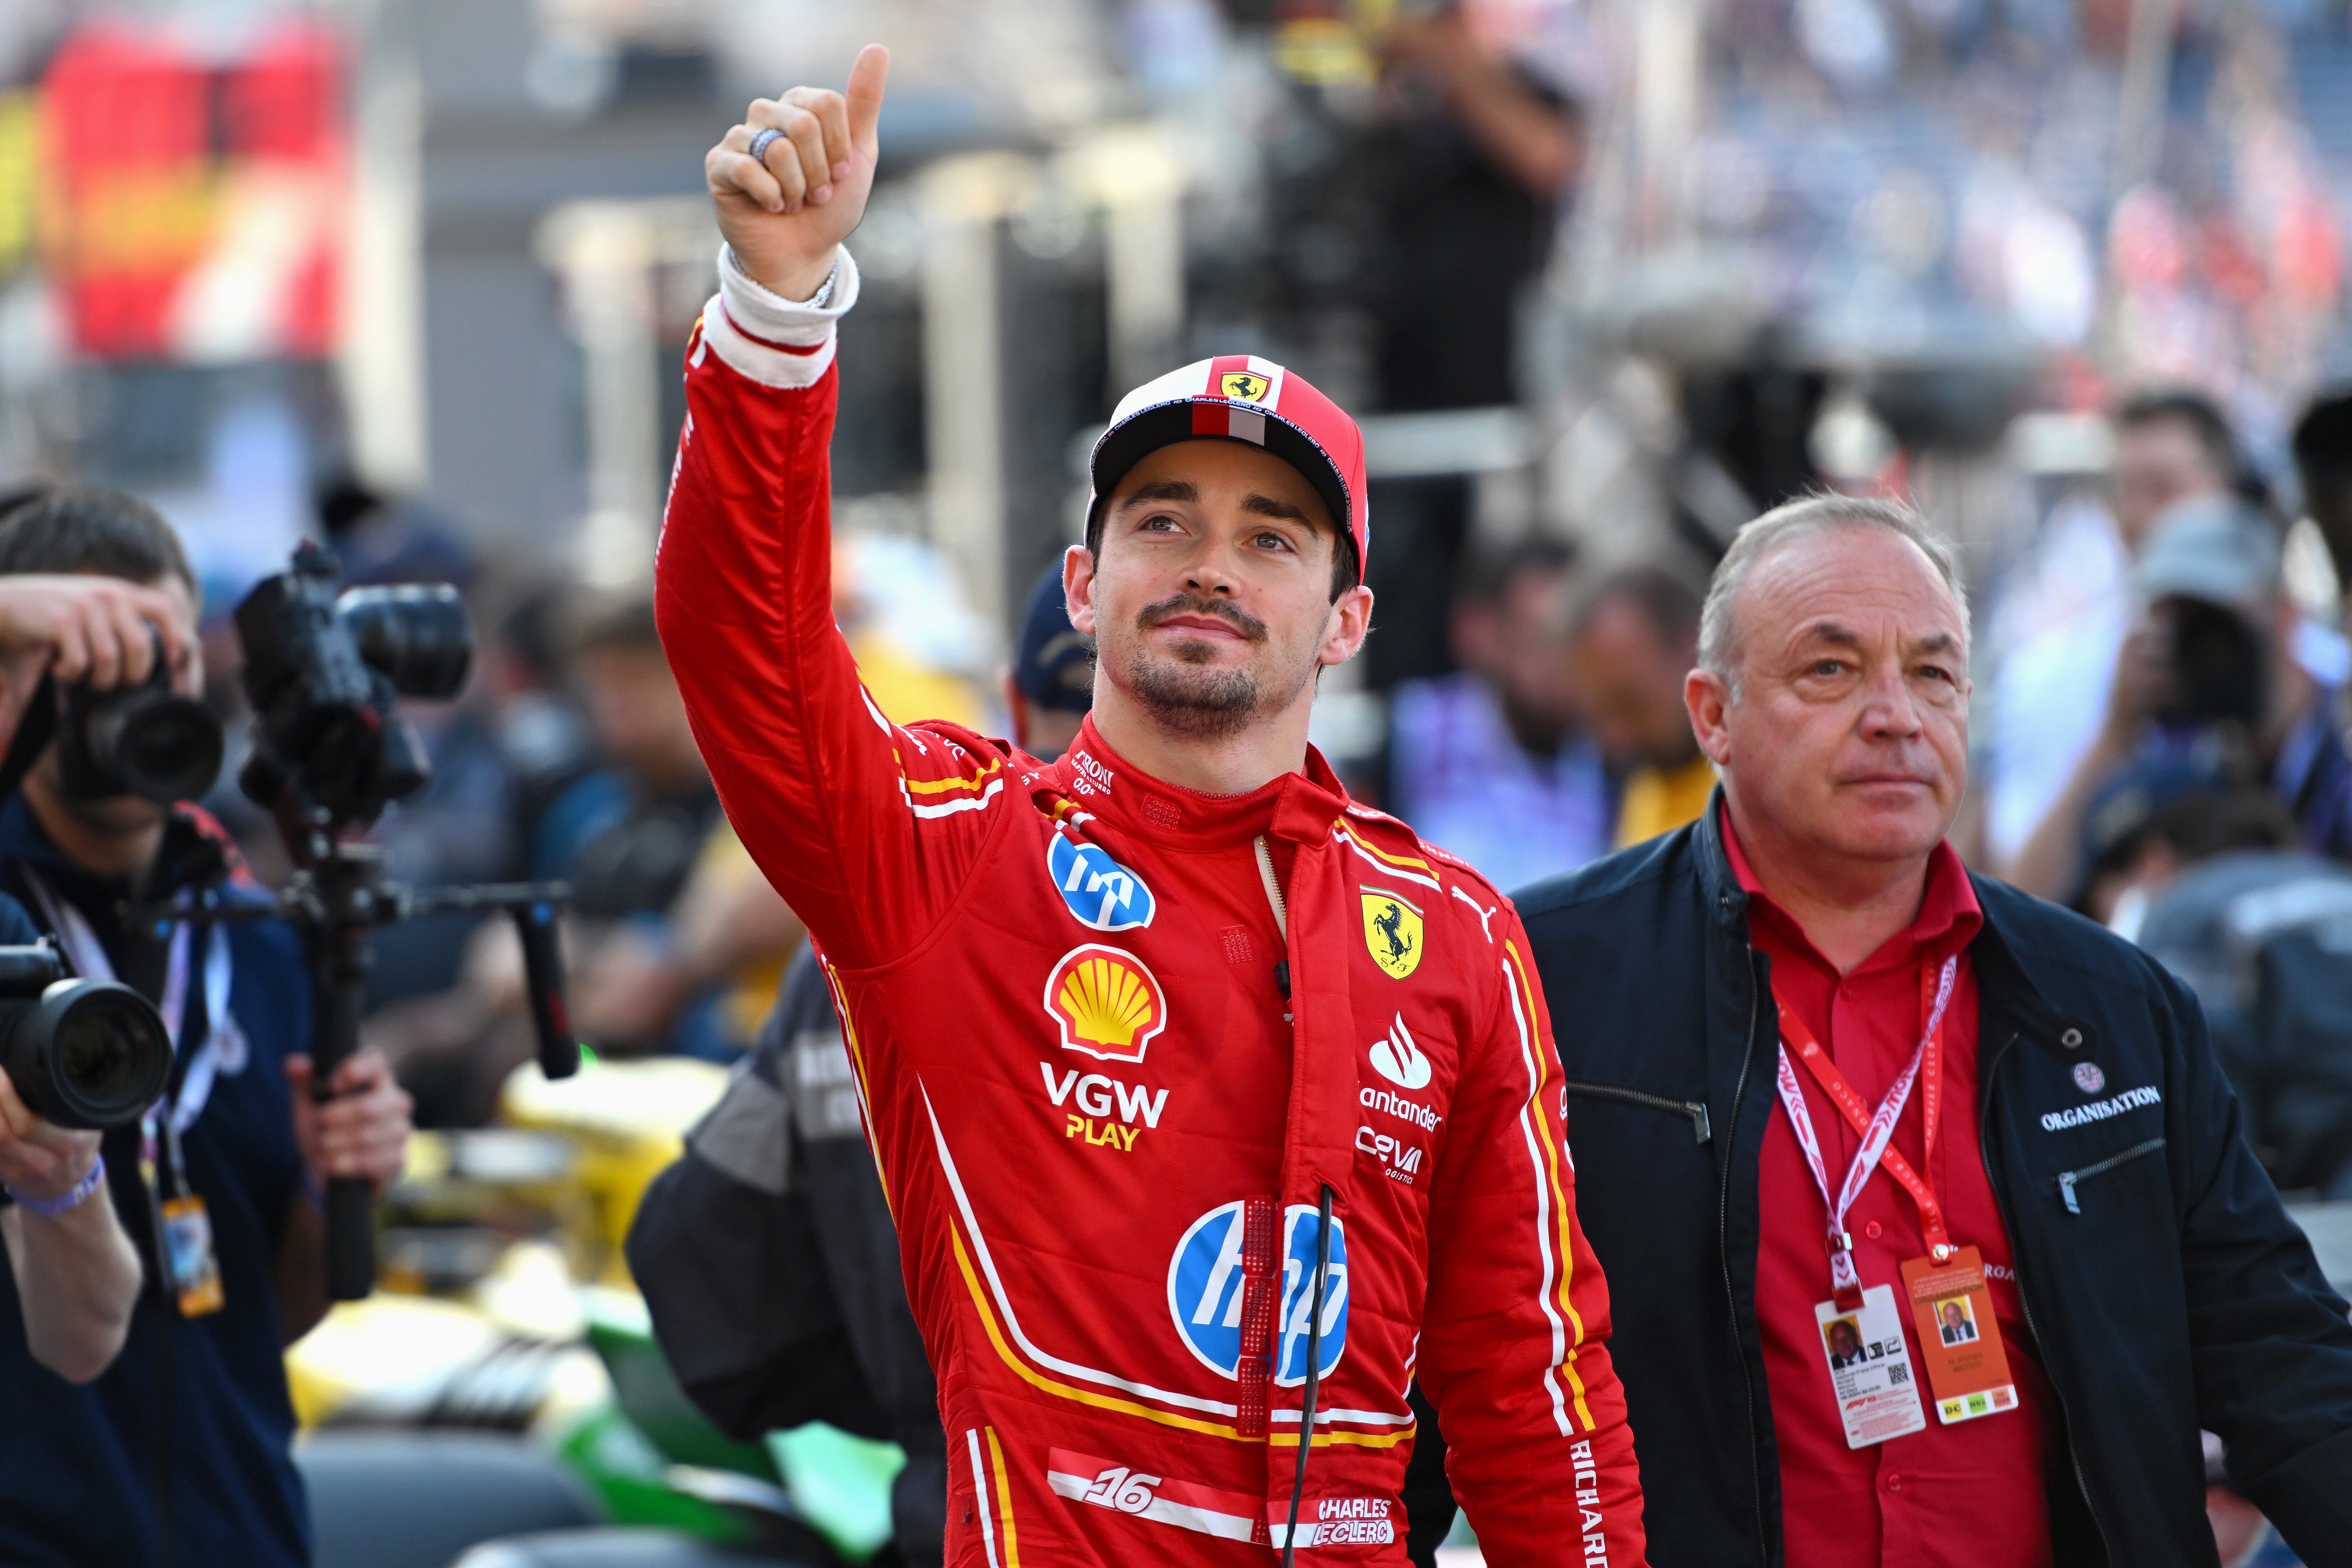 Charles Leclerc qualified on pole position for the Monaco Grand Prix